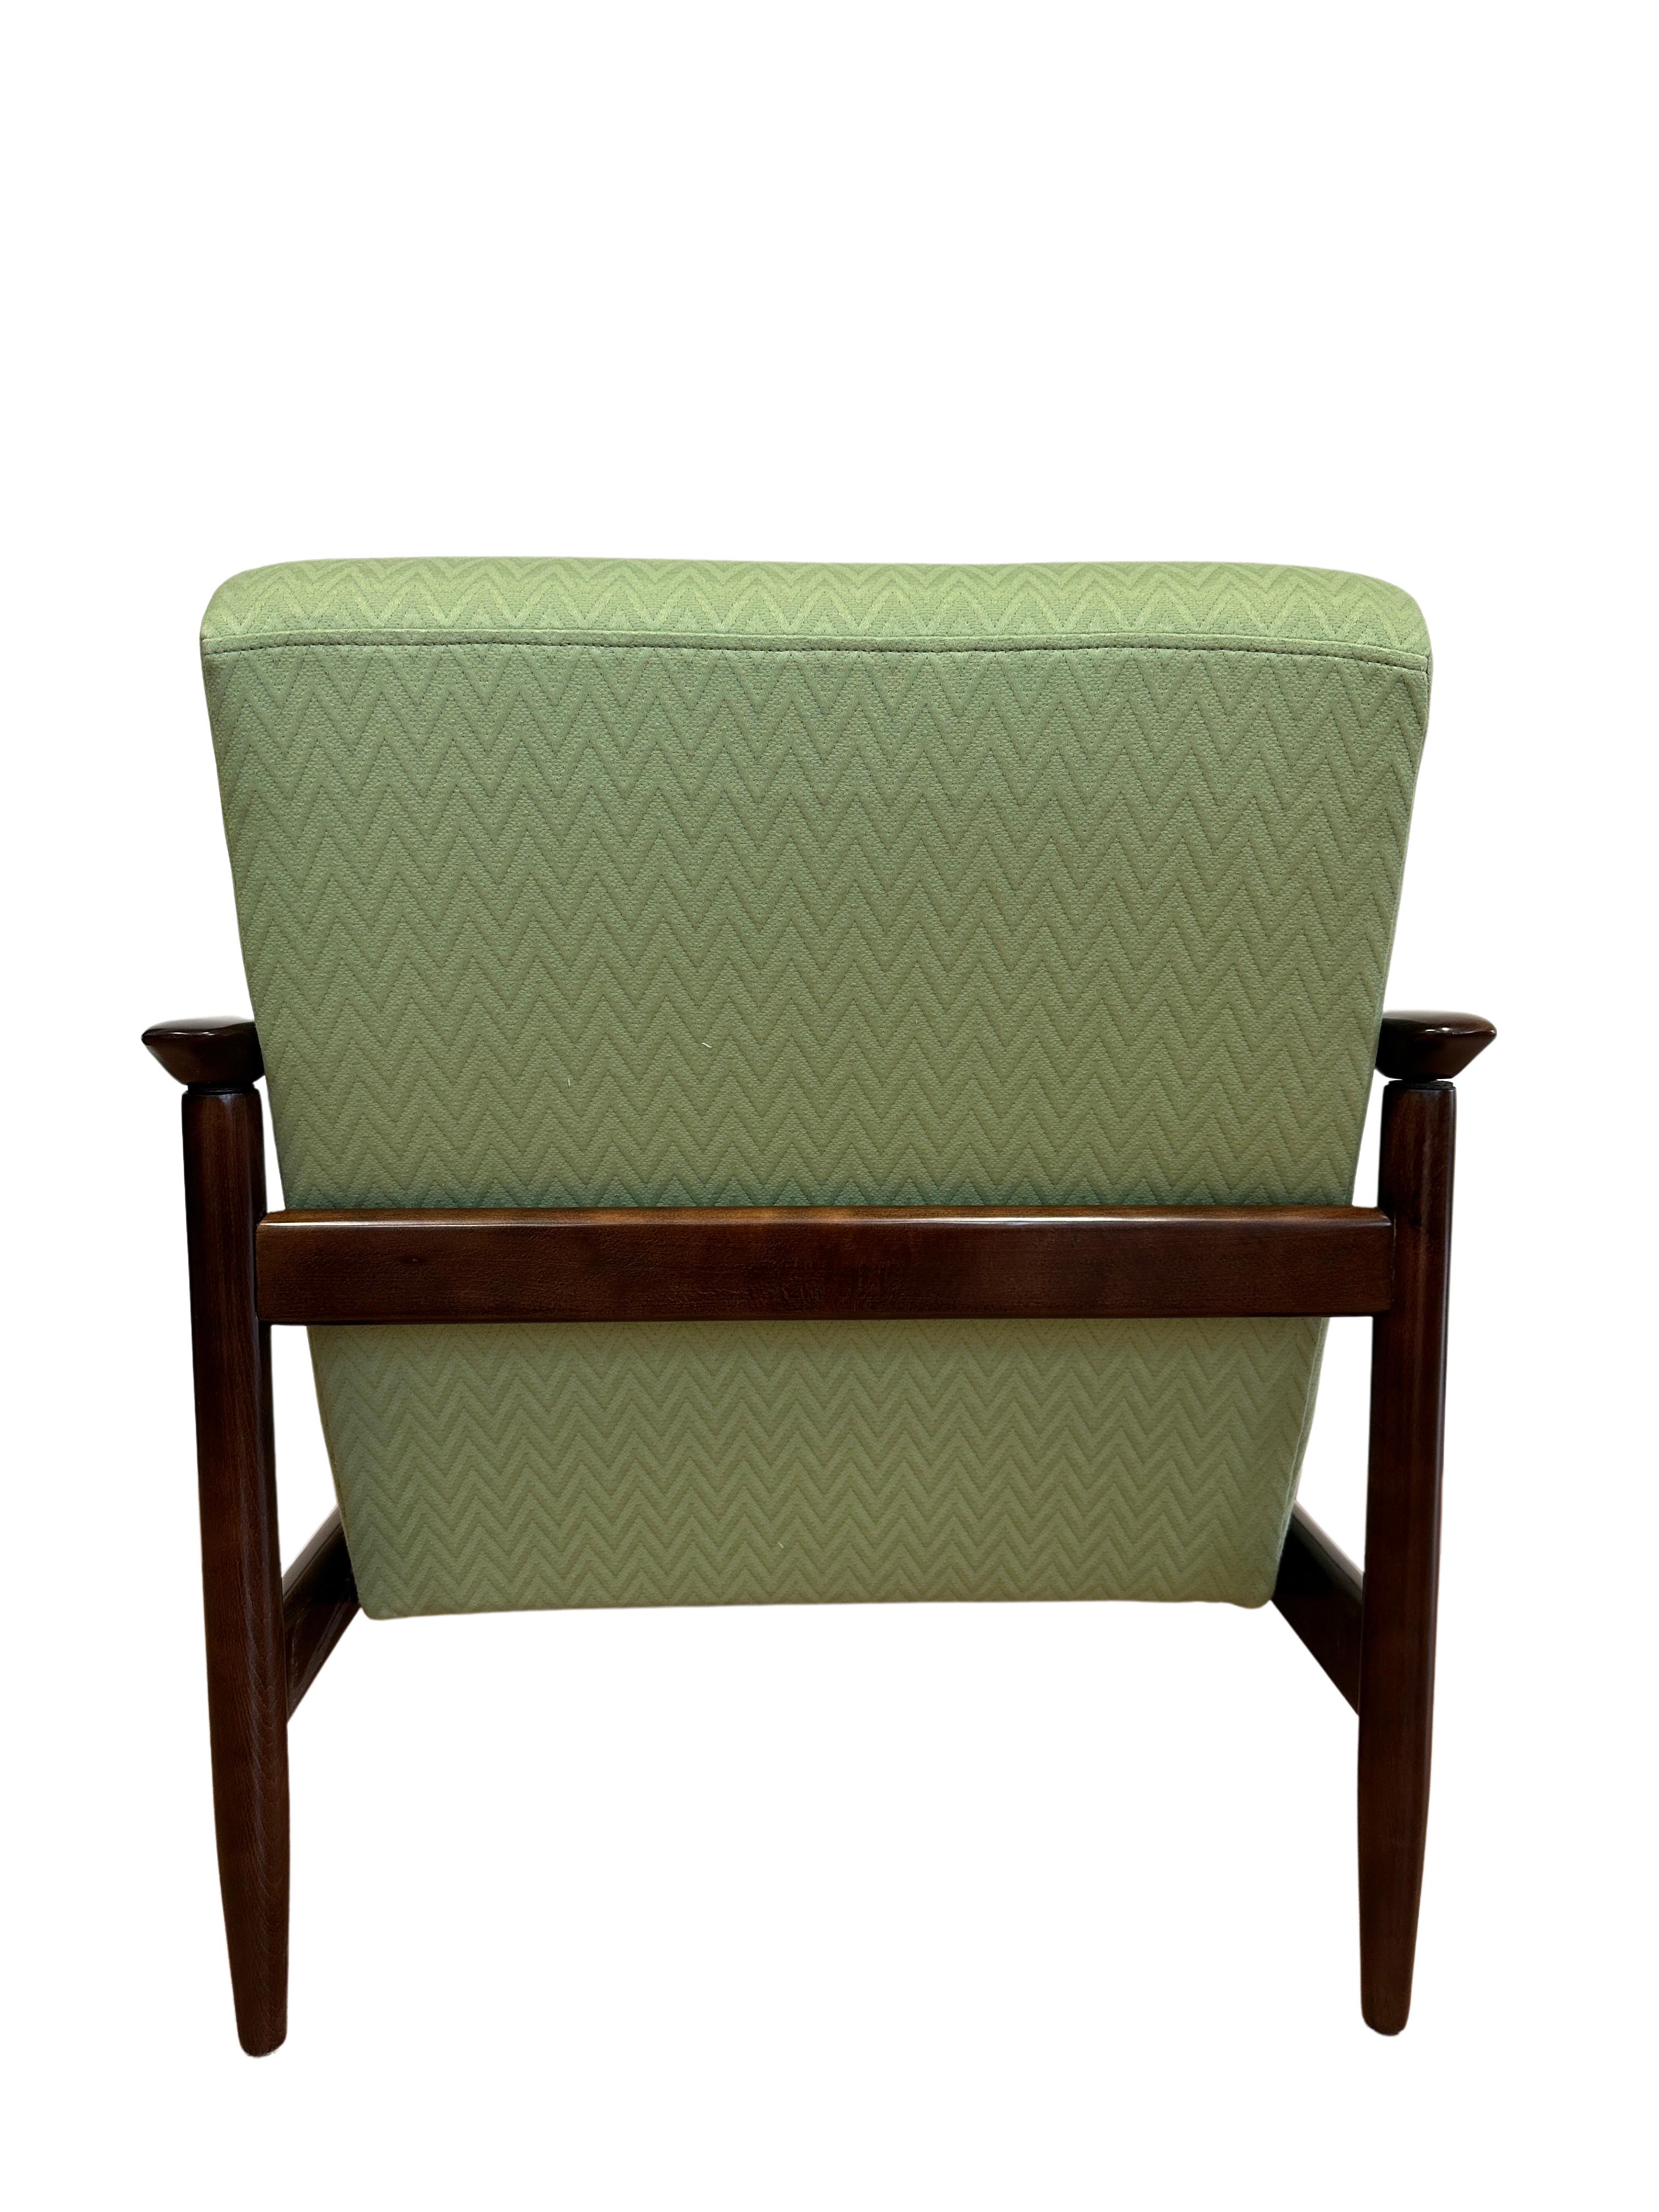 Wood Mid Century Armchair in Green Missoni Upholstery, by Edmund Homa, 1960s For Sale